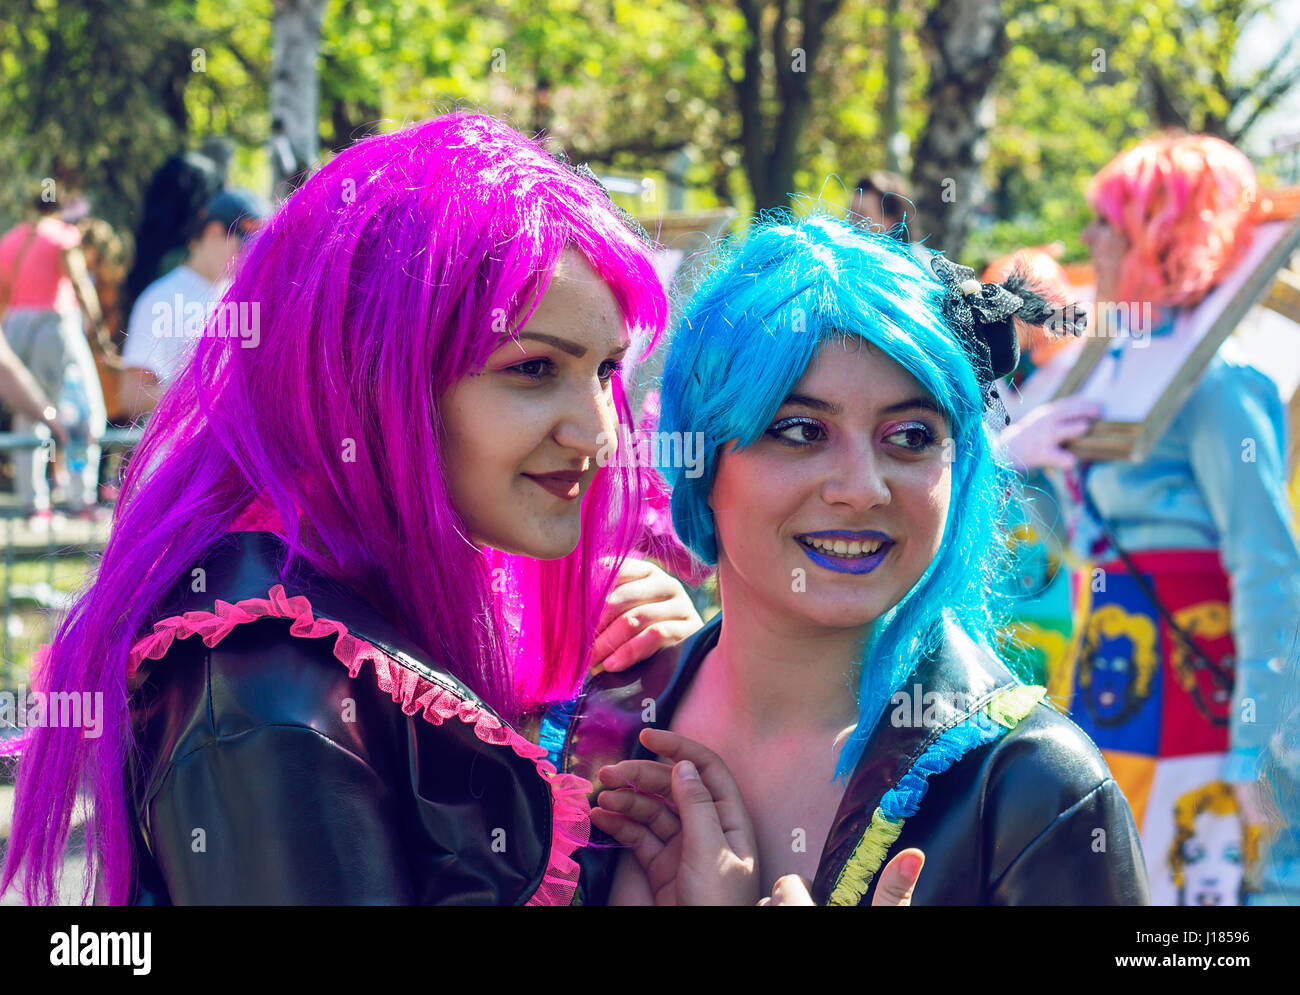 BELGRADE, SERBIA - APRIL 1st 2017: International carnival; Two girls wearing colorful wigs and costumes at 5th international carneval Stock Photo